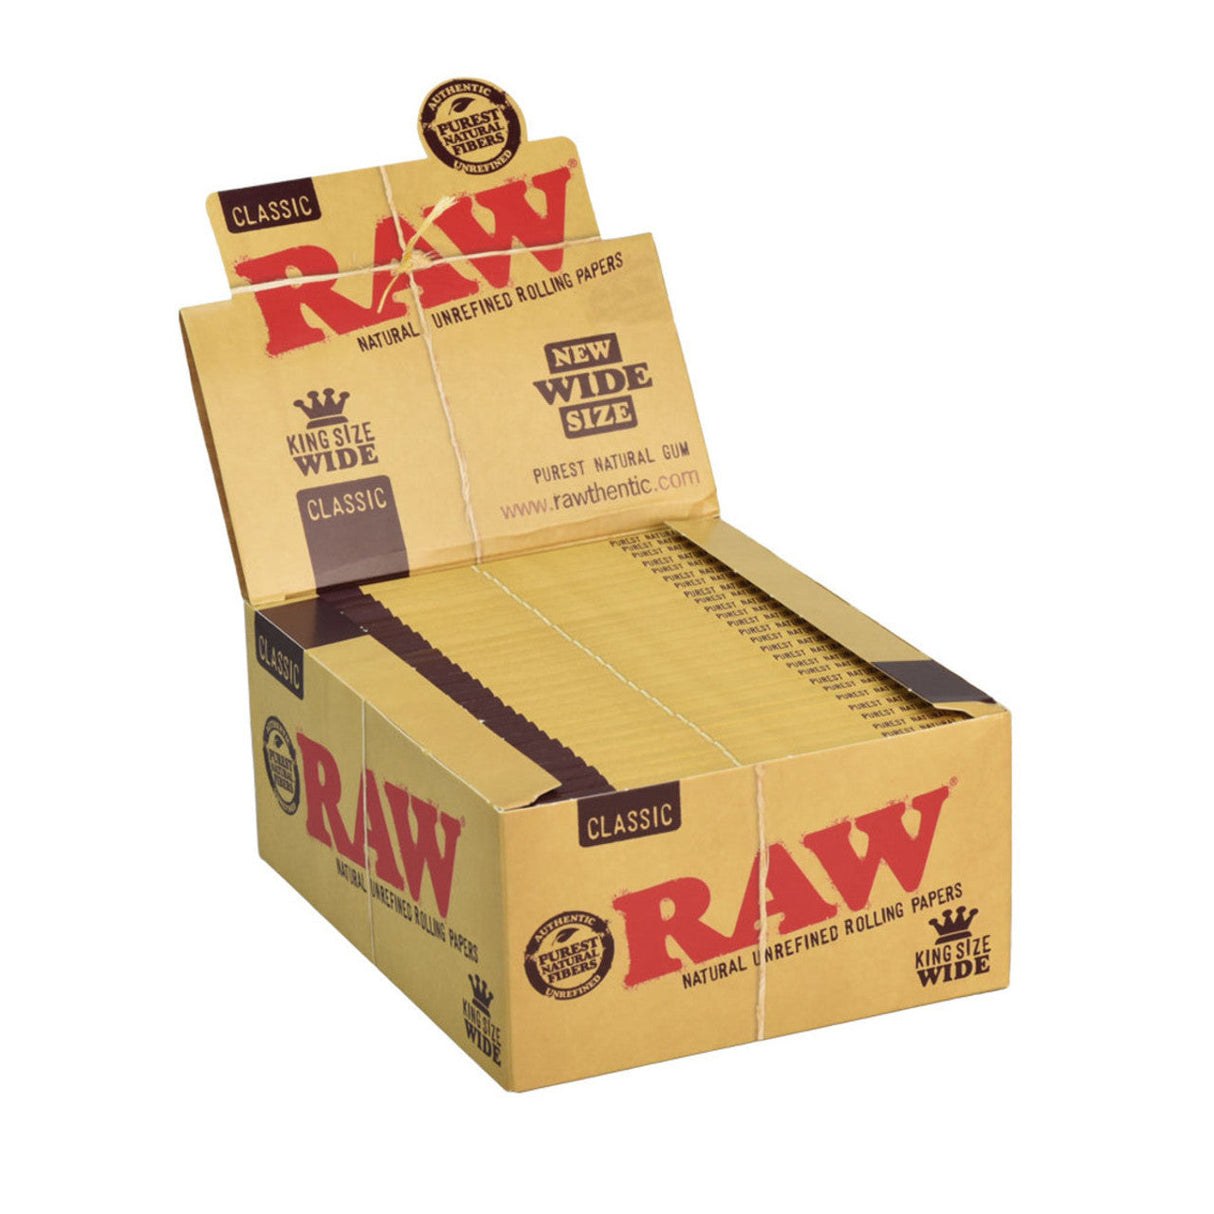 RAW Classic King Size Pre Rolled Cones Retail Display Box